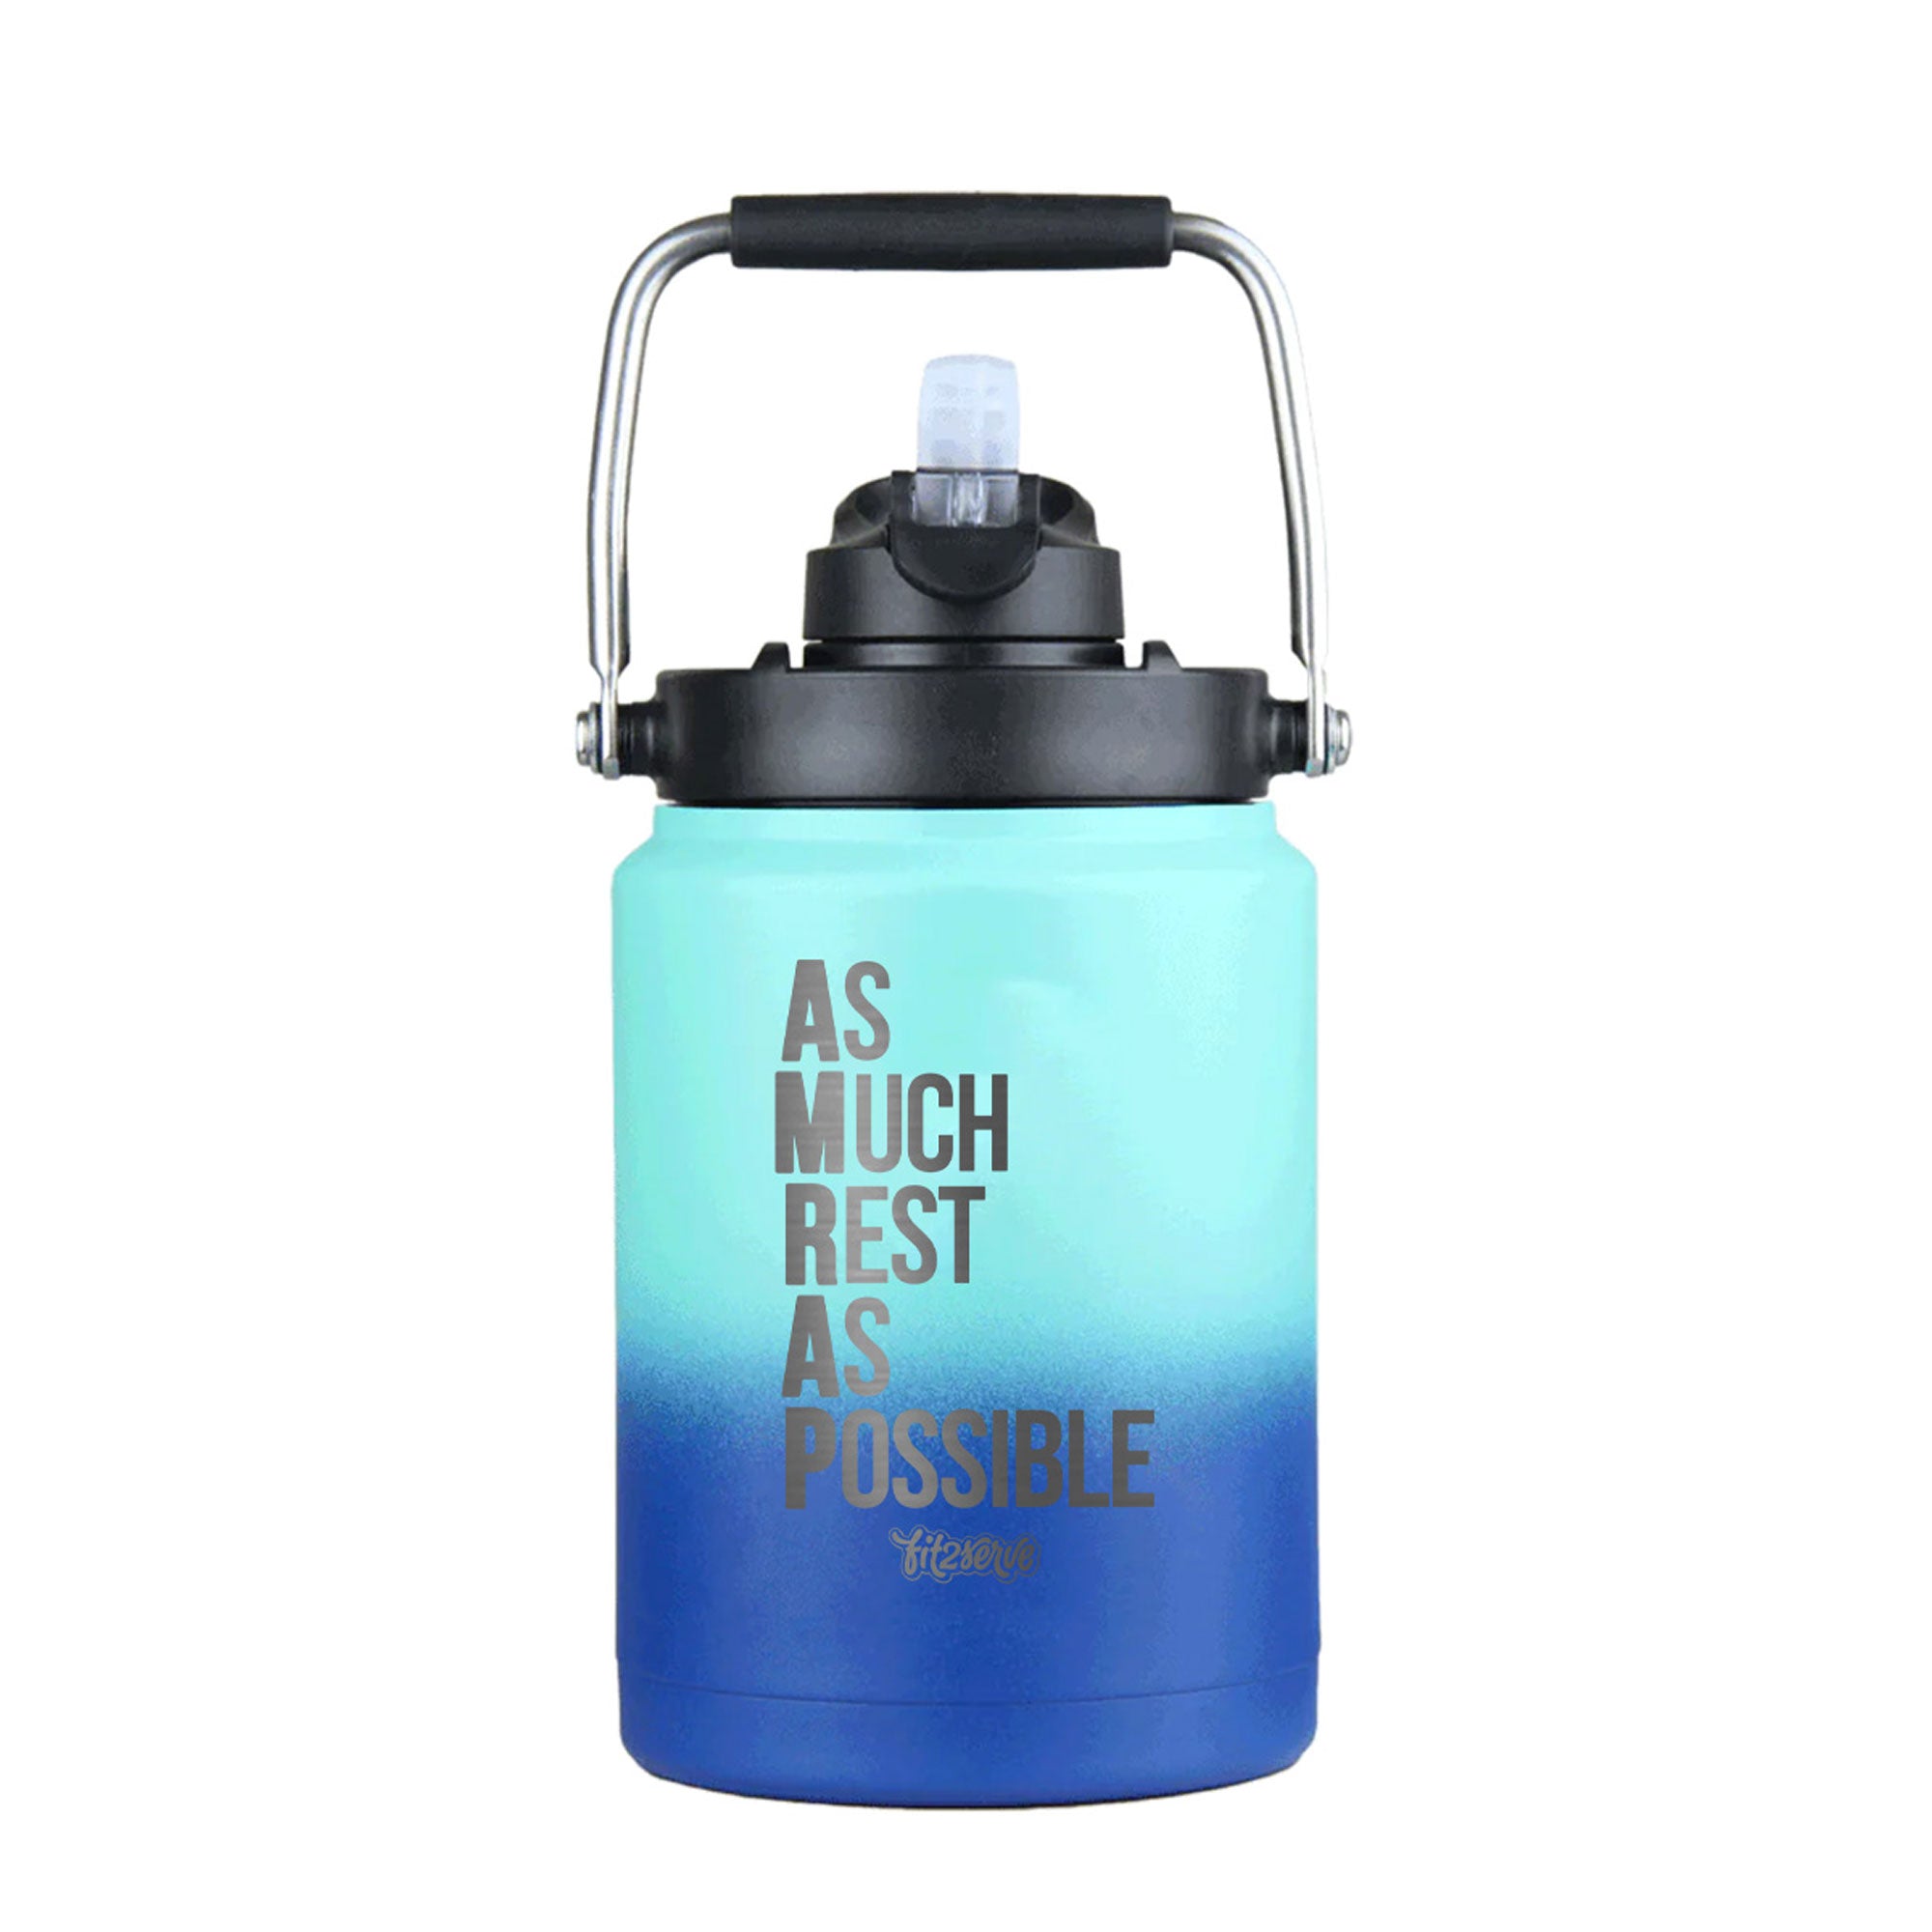 FIT2SERVE As Much Rest As Possible Half Gallon Jug - Navy Mint Ombre